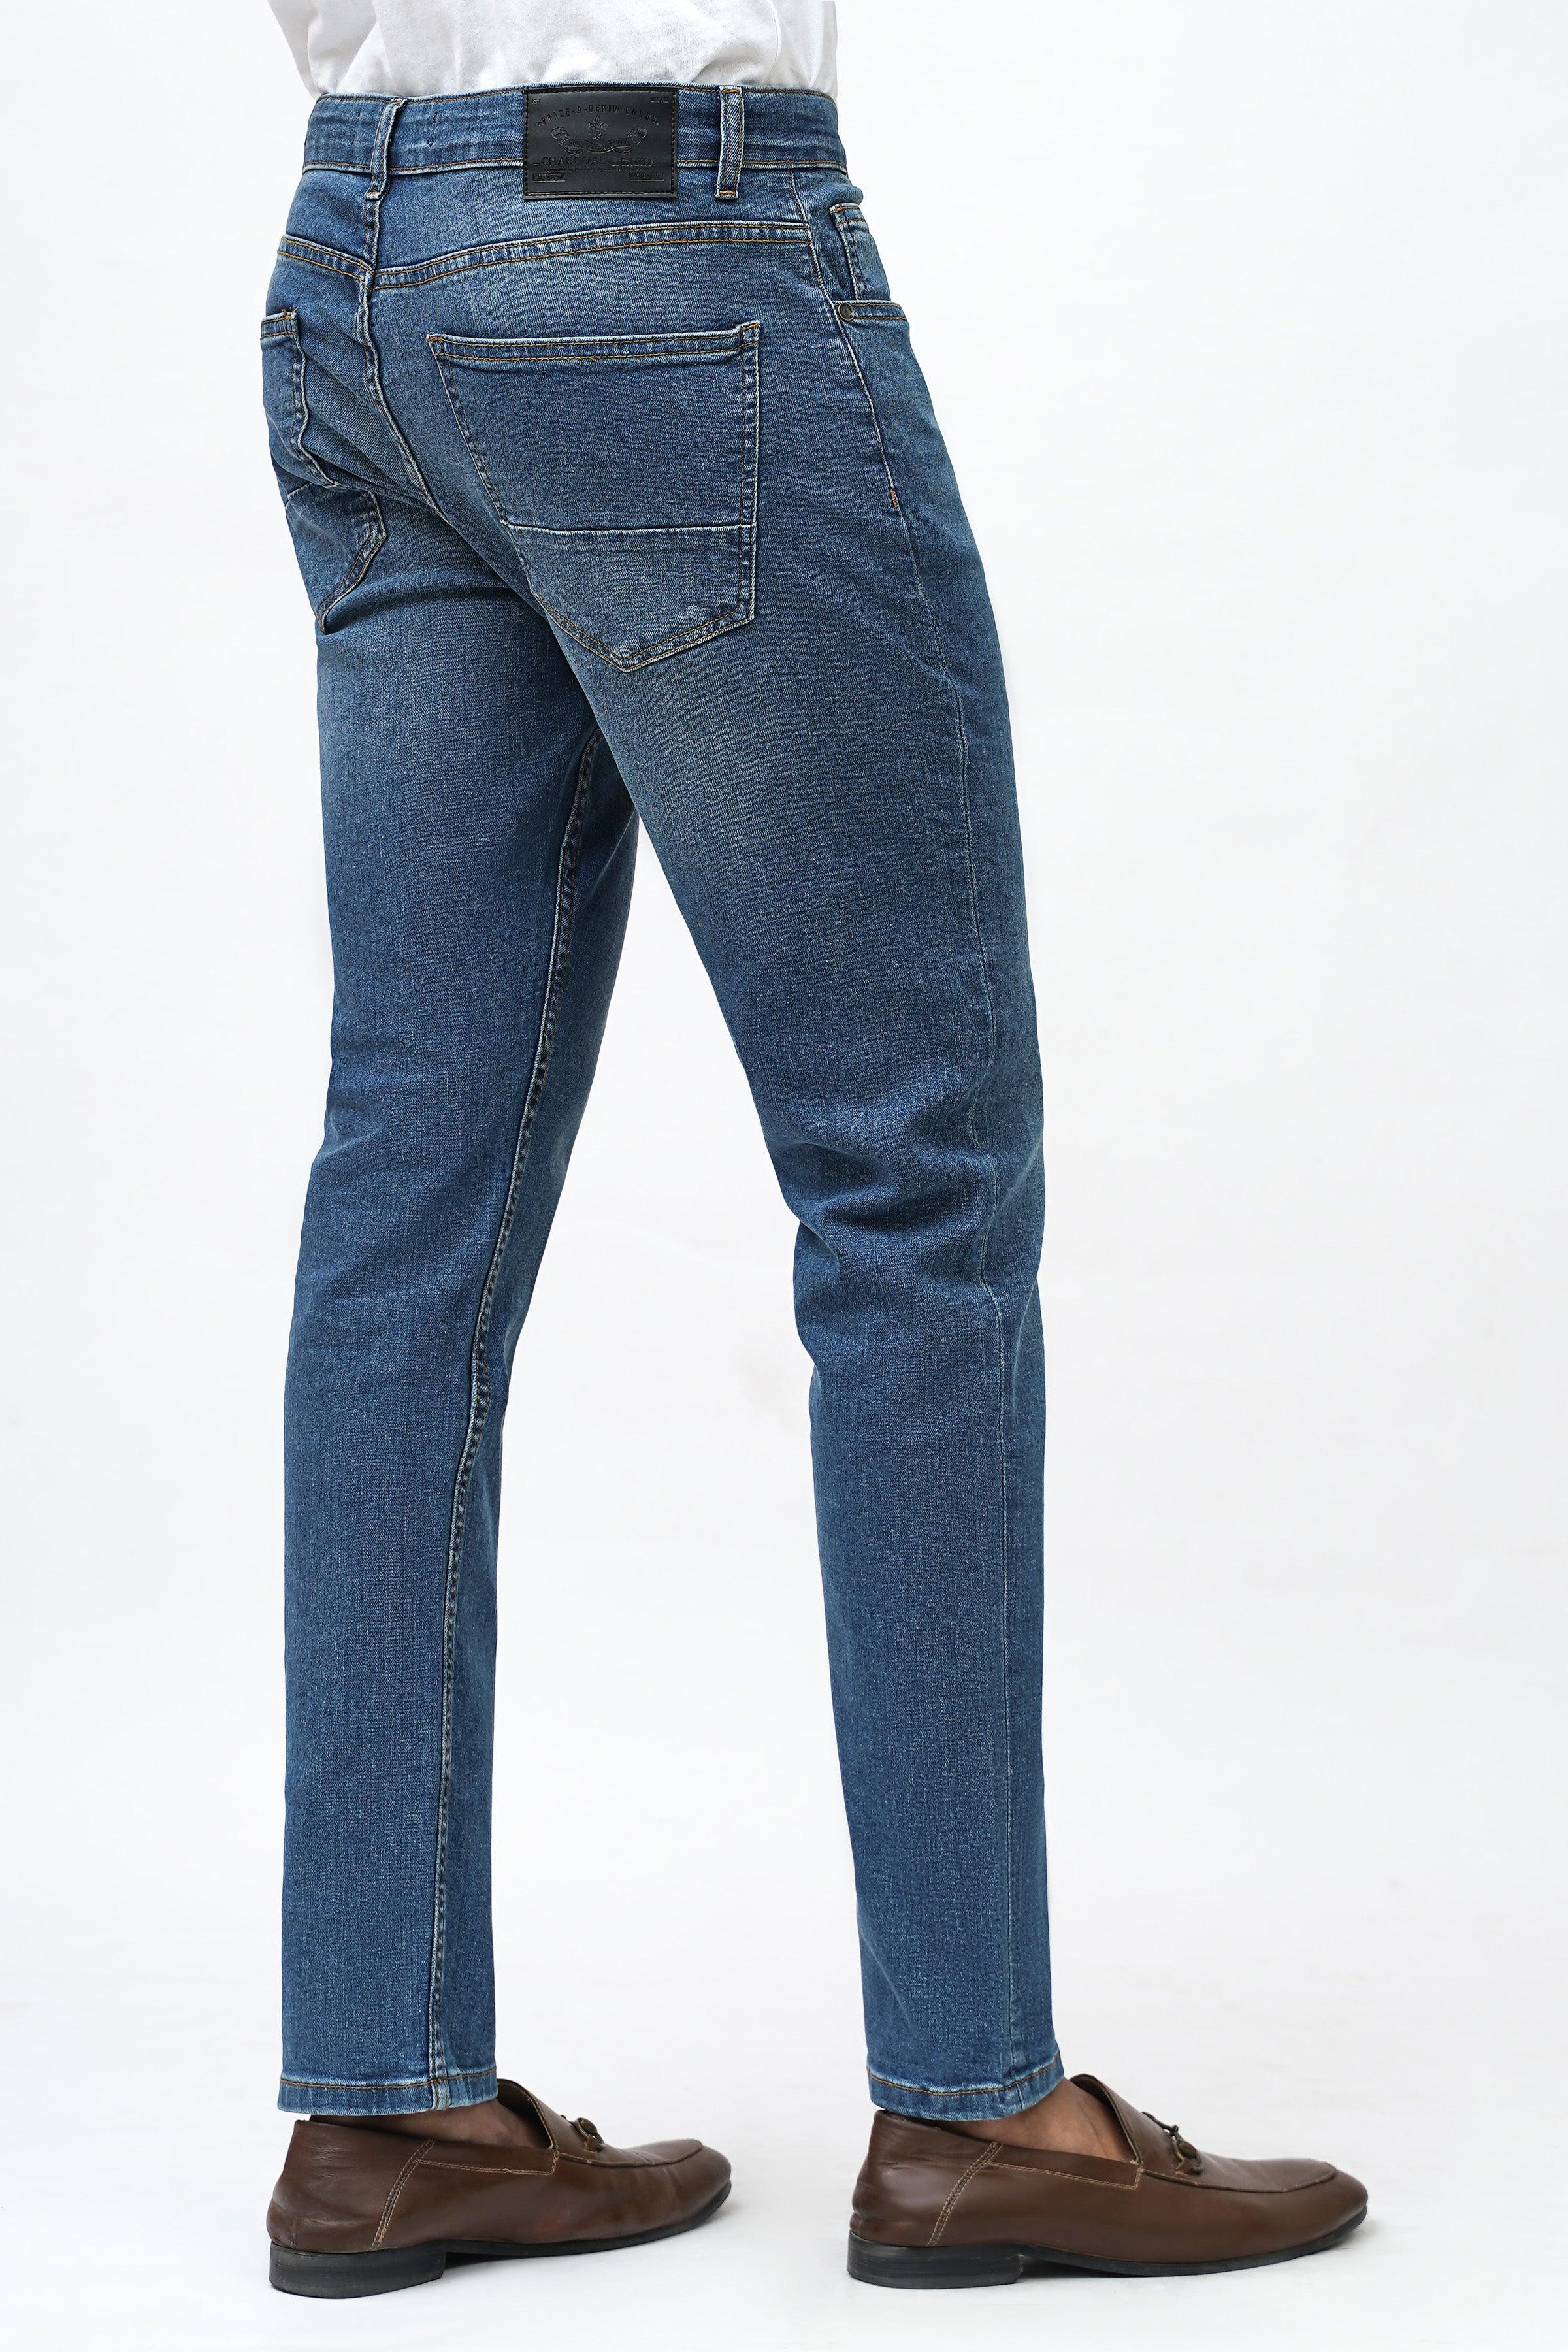 SLIM FIT MID BLUE DENIM JEAN at Charcoal Clothing